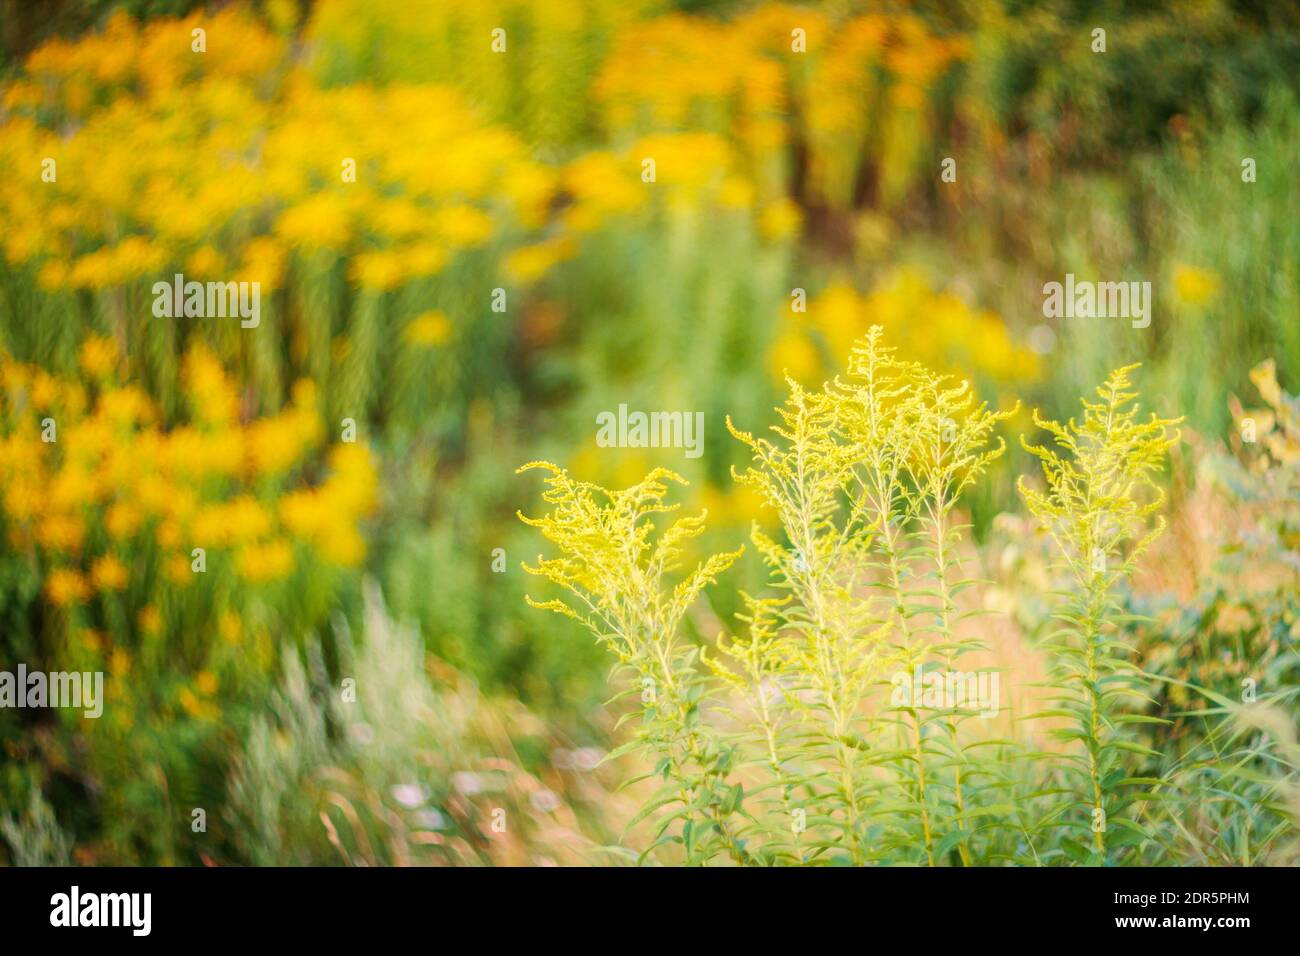 Blooming goldenrod (Solidago altissima) in sunset with low dof, soft focus lens Stock Photo